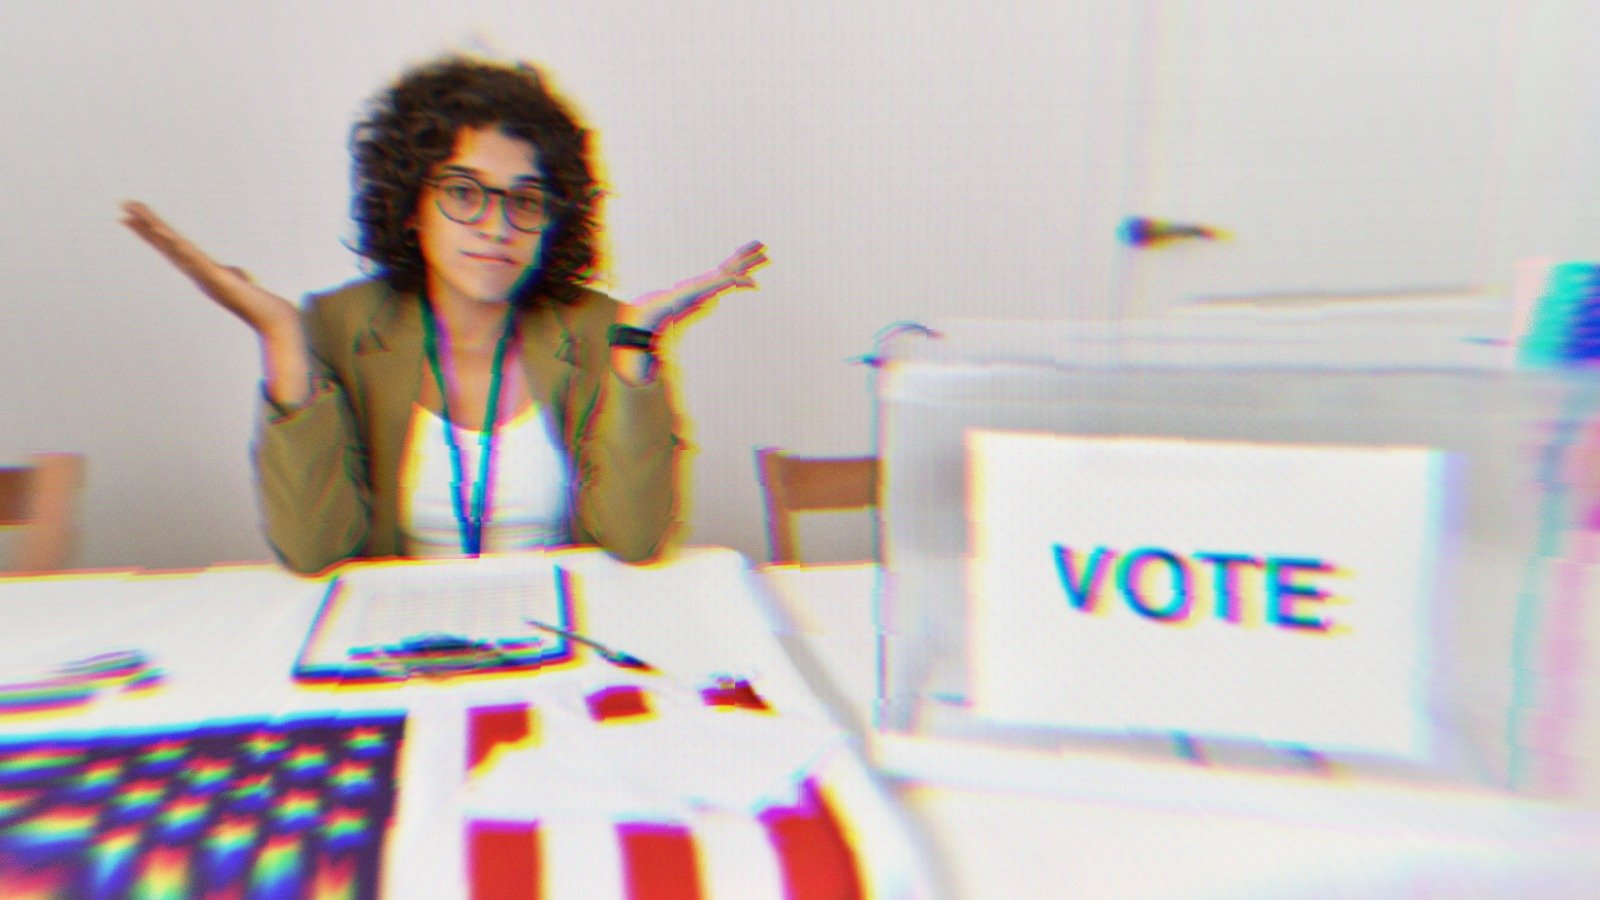 A person sitting in front of an American flag at a polling check in table shrugging, confused, with a Vote box in front of them